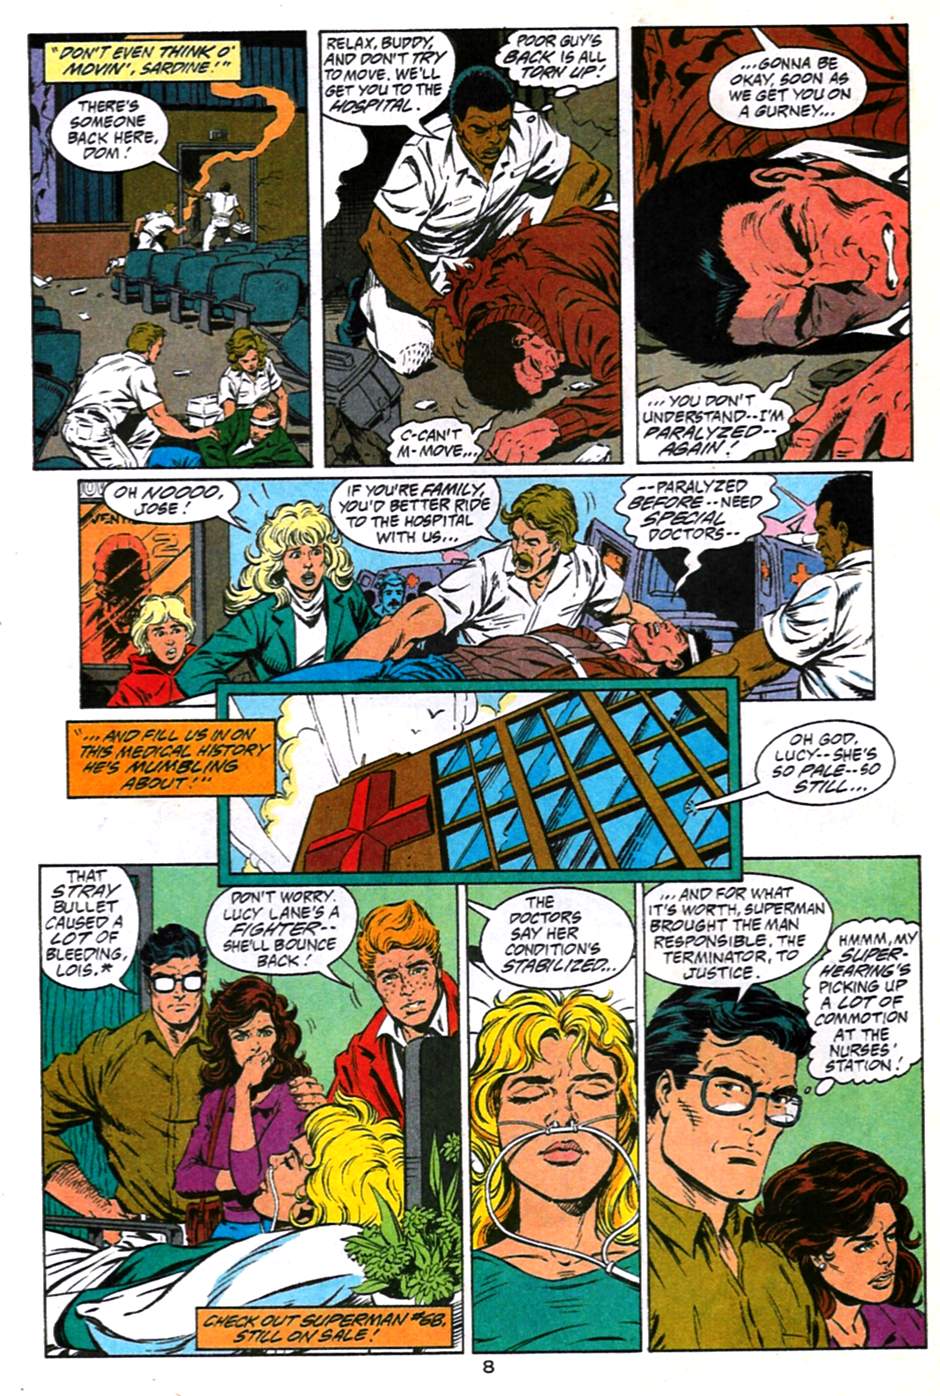 Adventures of Superman (1987) 491 Page 8